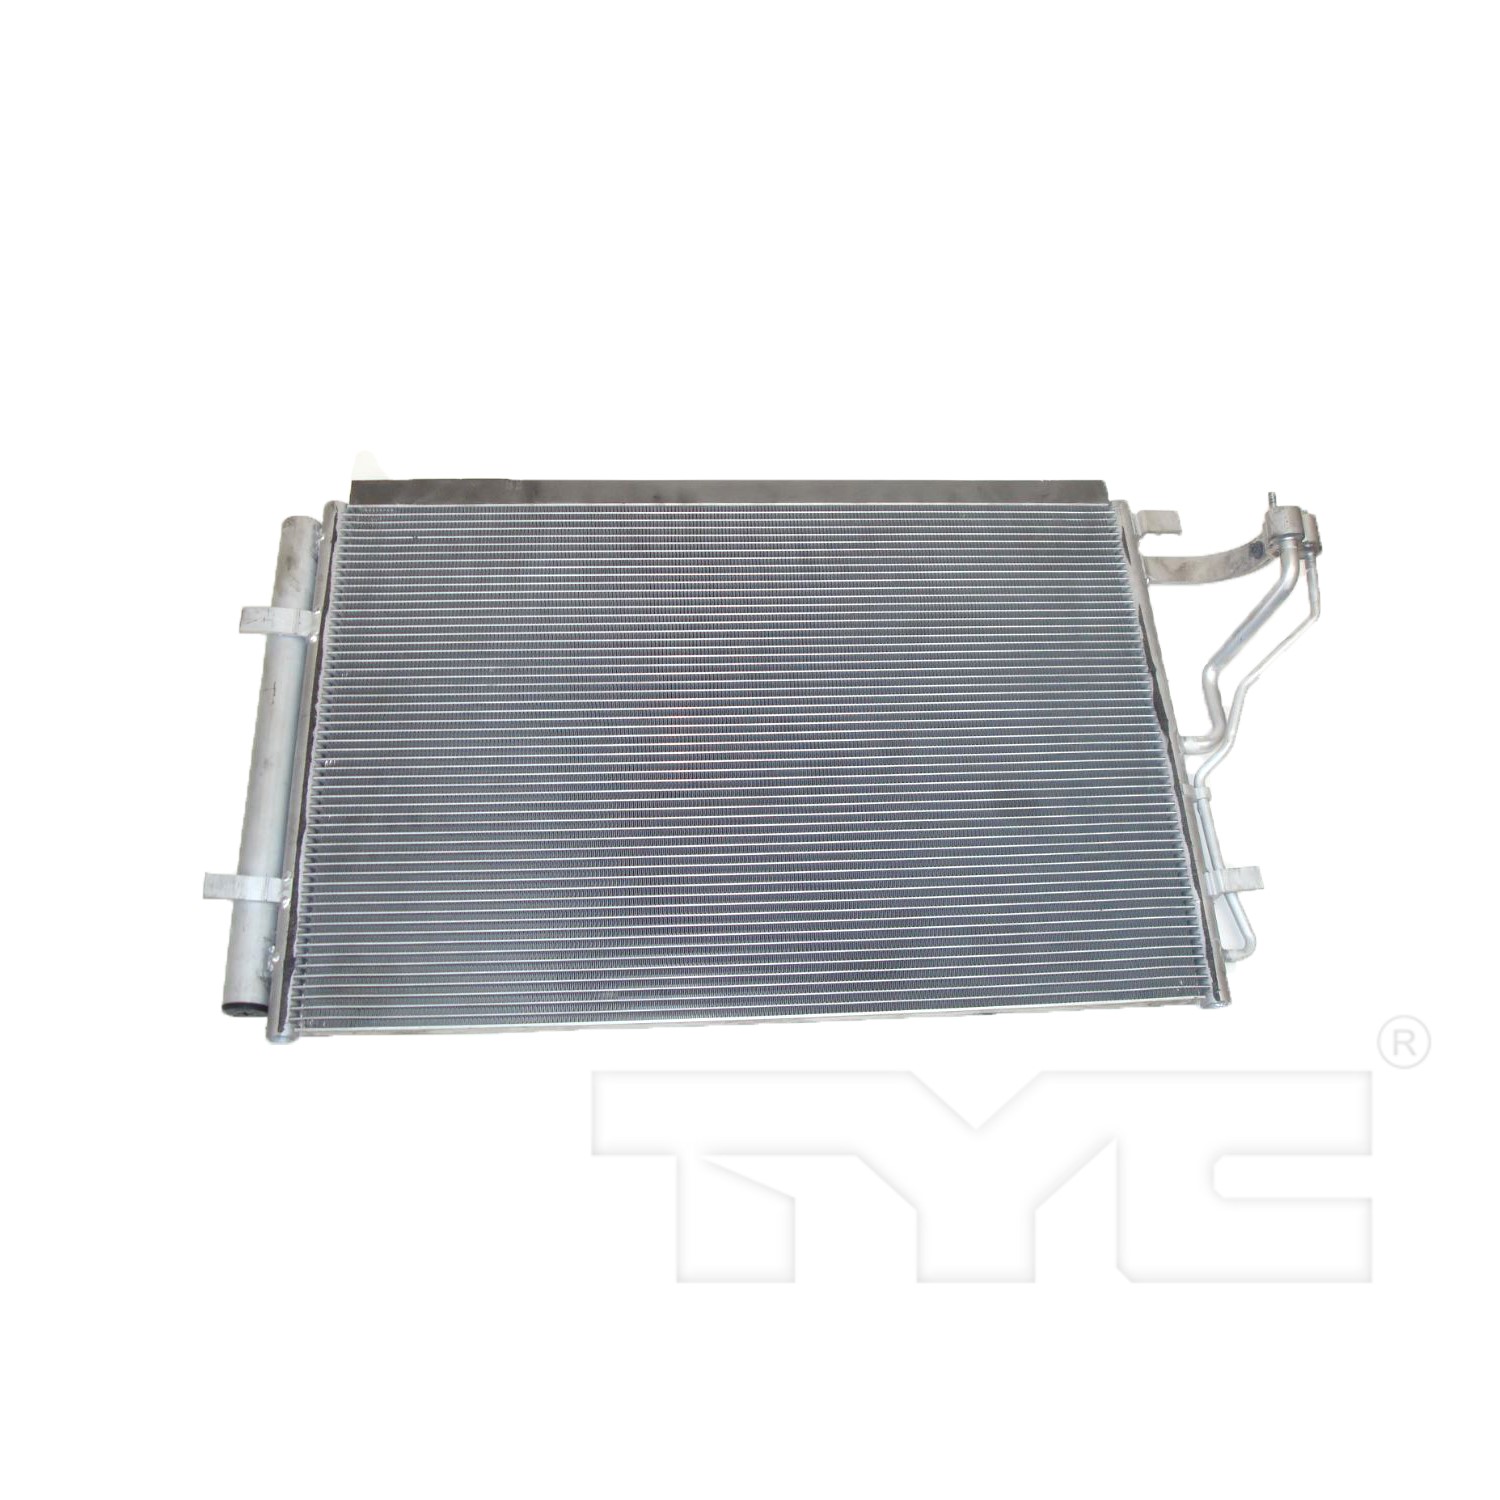 Aftermarket AC CONDENSERS for KIA - FORTE KOUP, FORTE KOUP,15-16,Air conditioning condenser